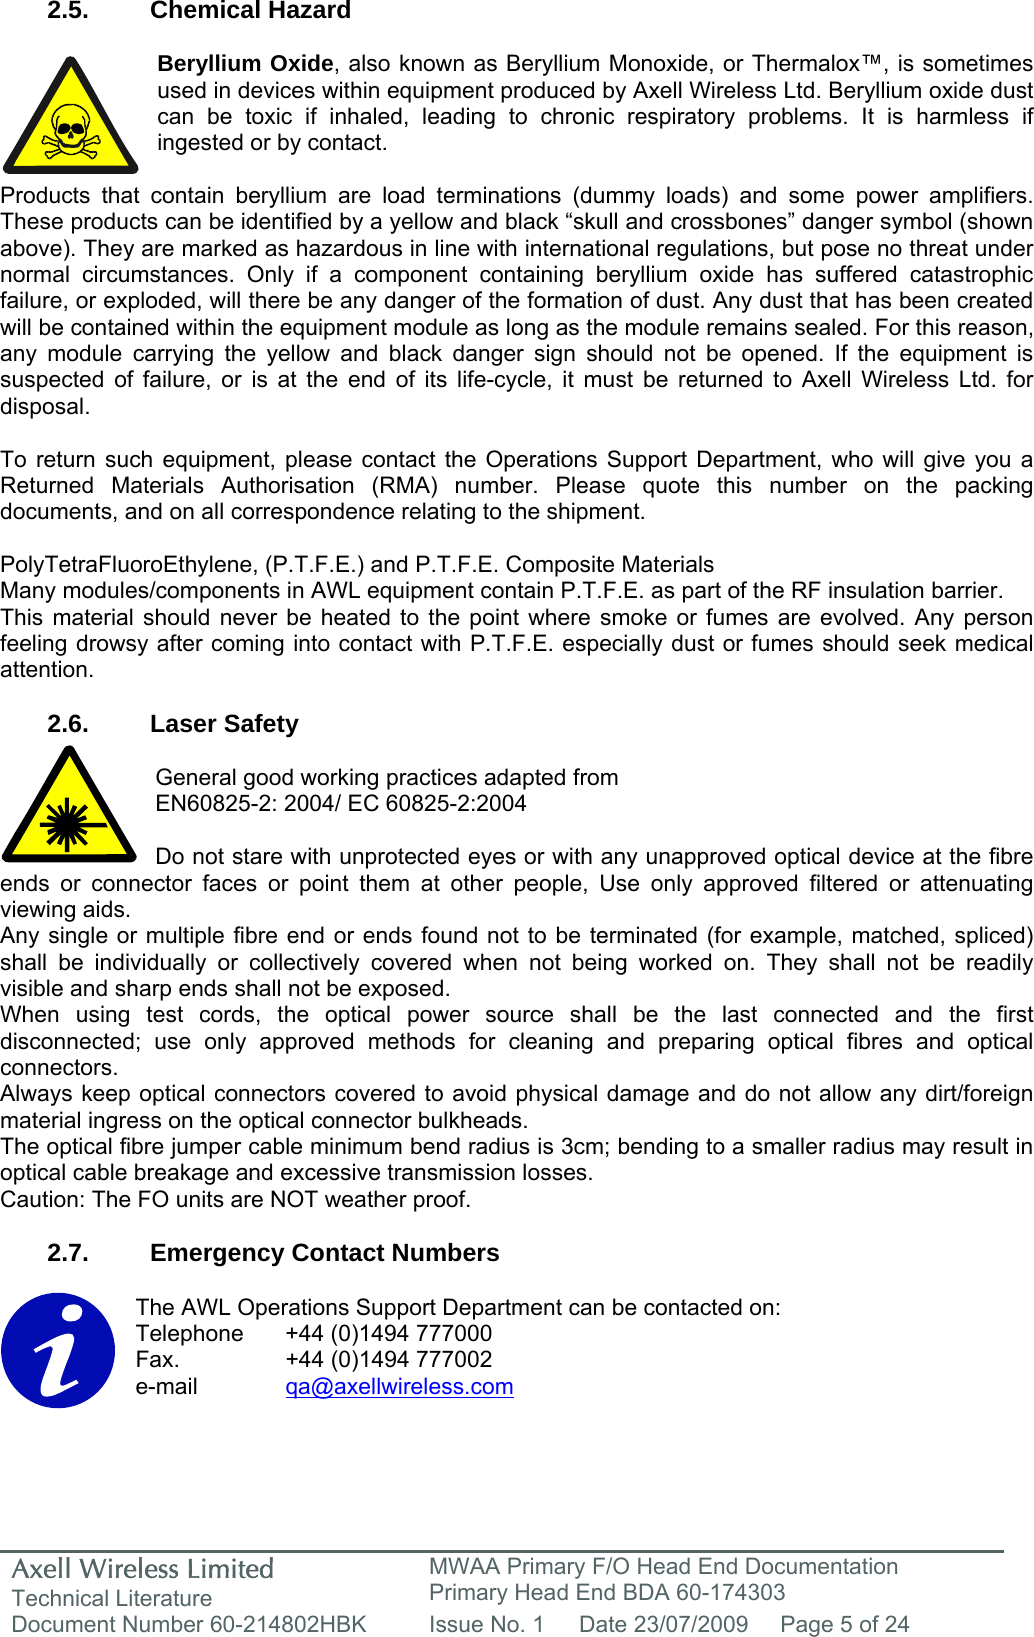 Axell Wireless Limited Technical Literature MWAA Primary F/O Head End Documentation Primary Head End BDA 60-174303 Document Number 60-214802HBK  Issue No. 1  Date 23/07/2009  Page 5 of 24   2.5. Chemical Hazard  Beryllium Oxide, also known as Beryllium Monoxide, or Thermalox™, is sometimes used in devices within equipment produced by Axell Wireless Ltd. Beryllium oxide dust can be toxic if inhaled, leading to chronic respiratory problems. It is harmless if ingested or by contact.  Products that contain beryllium are load terminations (dummy loads) and some power amplifiers. These products can be identified by a yellow and black “skull and crossbones” danger symbol (shown above). They are marked as hazardous in line with international regulations, but pose no threat under normal circumstances. Only if a component containing beryllium oxide has suffered catastrophic failure, or exploded, will there be any danger of the formation of dust. Any dust that has been created will be contained within the equipment module as long as the module remains sealed. For this reason, any module carrying the yellow and black danger sign should not be opened. If the equipment is suspected of failure, or is at the end of its life-cycle, it must be returned to Axell Wireless Ltd. for disposal.  To return such equipment, please contact the Operations Support Department, who will give you a Returned Materials Authorisation (RMA) number. Please quote this number on the packing documents, and on all correspondence relating to the shipment.  PolyTetraFluoroEthylene, (P.T.F.E.) and P.T.F.E. Composite Materials Many modules/components in AWL equipment contain P.T.F.E. as part of the RF insulation barrier. This material should never be heated to the point where smoke or fumes are evolved. Any person feeling drowsy after coming into contact with P.T.F.E. especially dust or fumes should seek medical attention.  2.6. Laser Safety  General good working practices adapted from EN60825-2: 2004/ EC 60825-2:2004  Do not stare with unprotected eyes or with any unapproved optical device at the fibre ends or connector faces or point them at other people, Use only approved filtered or attenuating viewing aids. Any single or multiple fibre end or ends found not to be terminated (for example, matched, spliced) shall be individually or collectively covered when not being worked on. They shall not be readily visible and sharp ends shall not be exposed. When using test cords, the optical power source shall be the last connected and the first disconnected; use only approved methods for cleaning and preparing optical fibres and optical connectors. Always keep optical connectors covered to avoid physical damage and do not allow any dirt/foreign material ingress on the optical connector bulkheads. The optical fibre jumper cable minimum bend radius is 3cm; bending to a smaller radius may result in optical cable breakage and excessive transmission losses. Caution: The FO units are NOT weather proof.  2.7.  Emergency Contact Numbers  The AWL Operations Support Department can be contacted on: Telephone   +44 (0)1494 777000 Fax.    +44 (0)1494 777002 e-mail   qa@axellwireless.com    